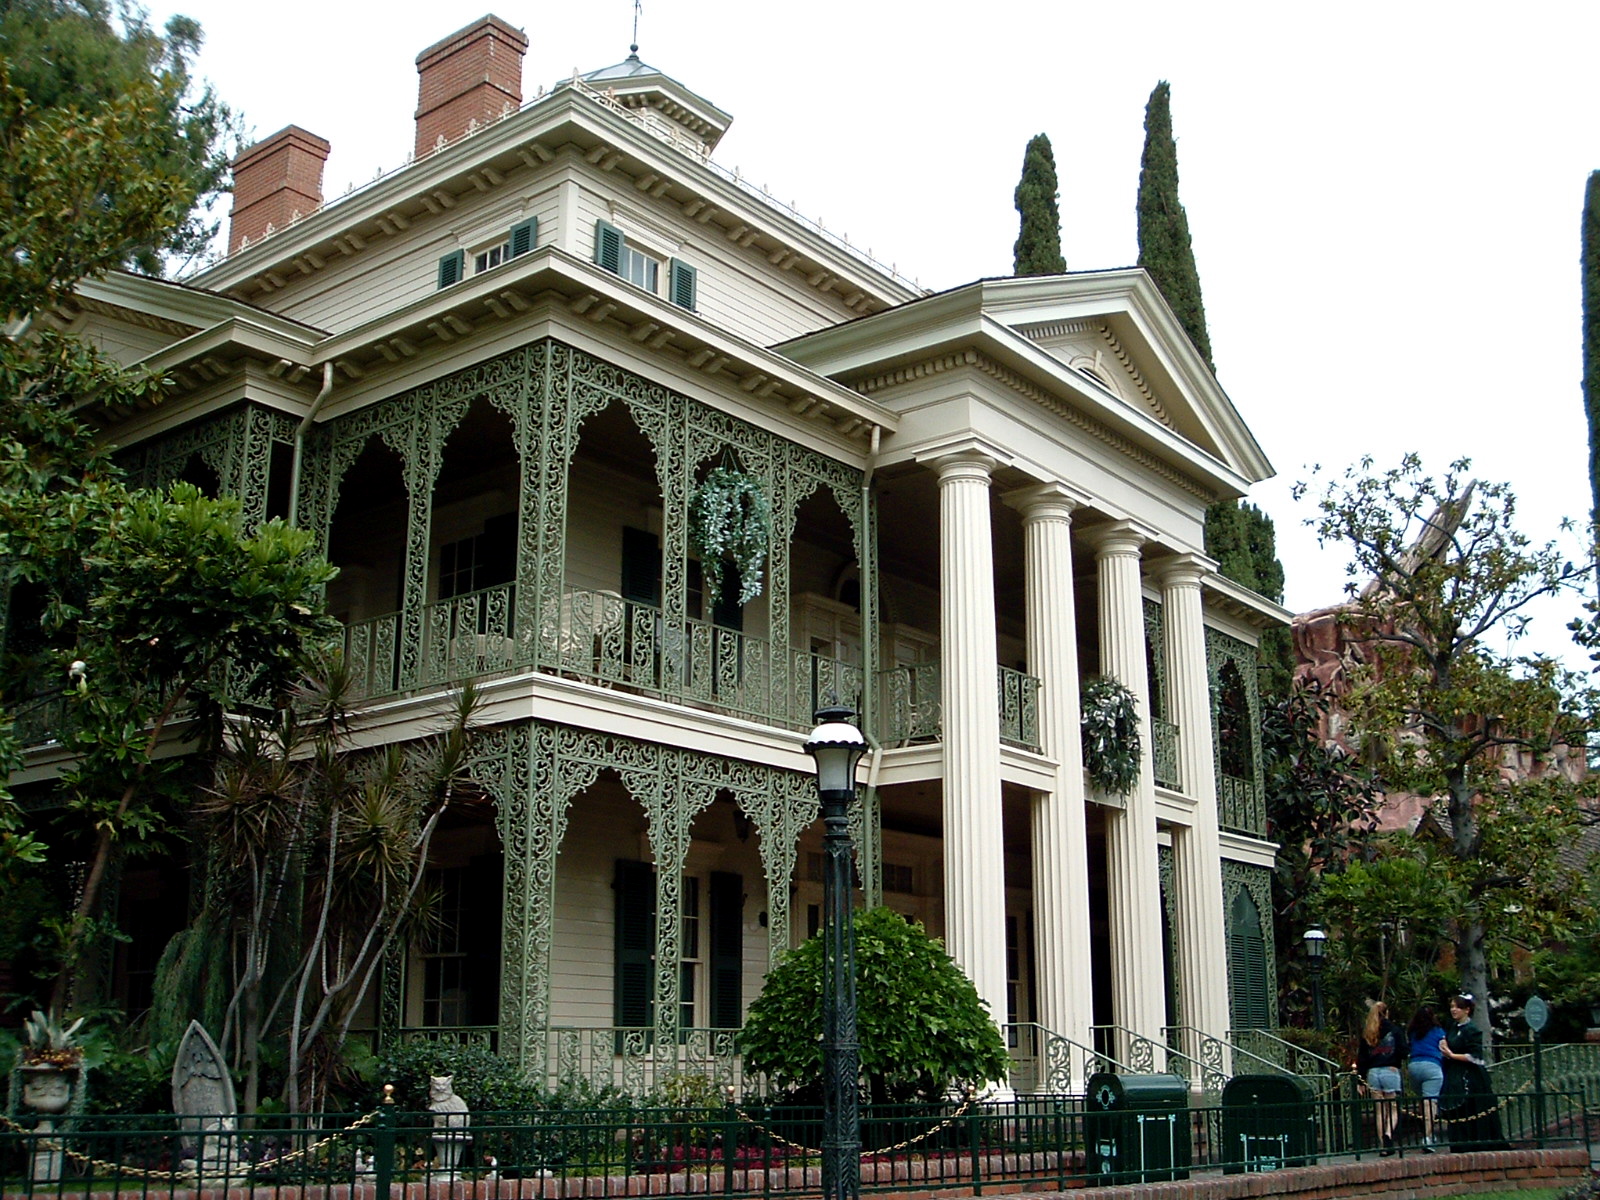 File:Haunted Mansion Exterior.JPG - Wikimedia Commons